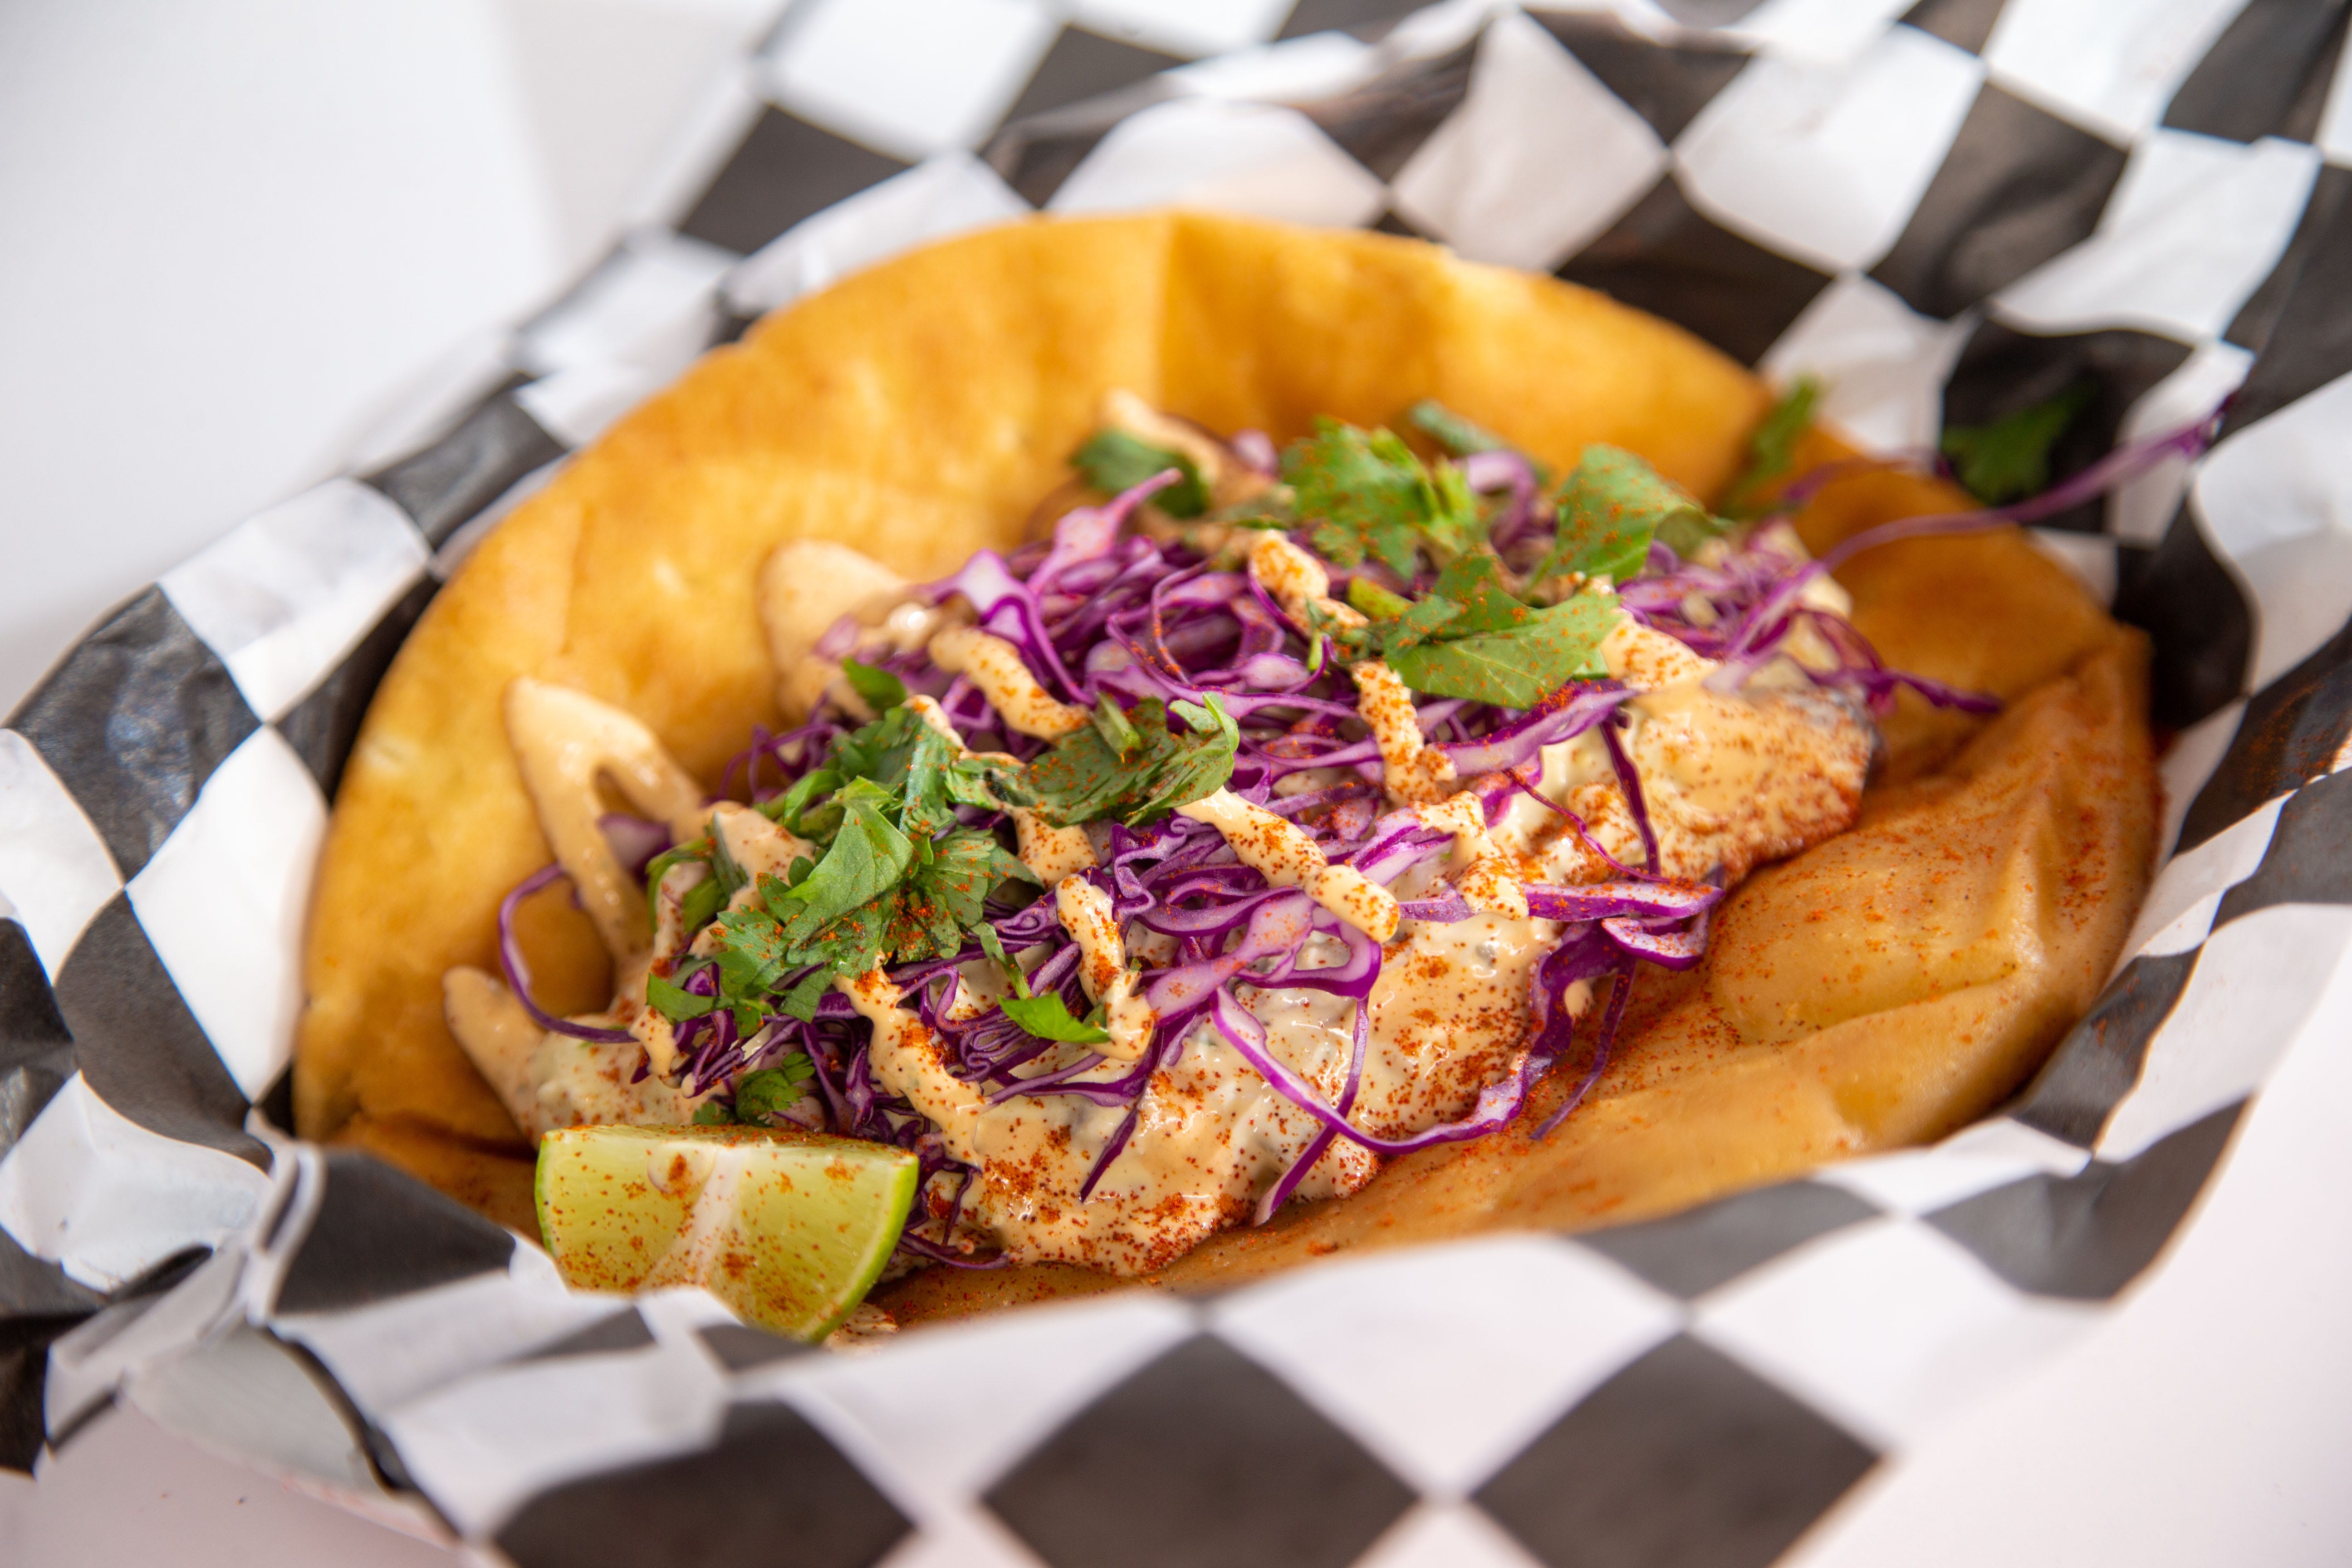 Iowa State Fair new foods were announced Tuesday. See past additions